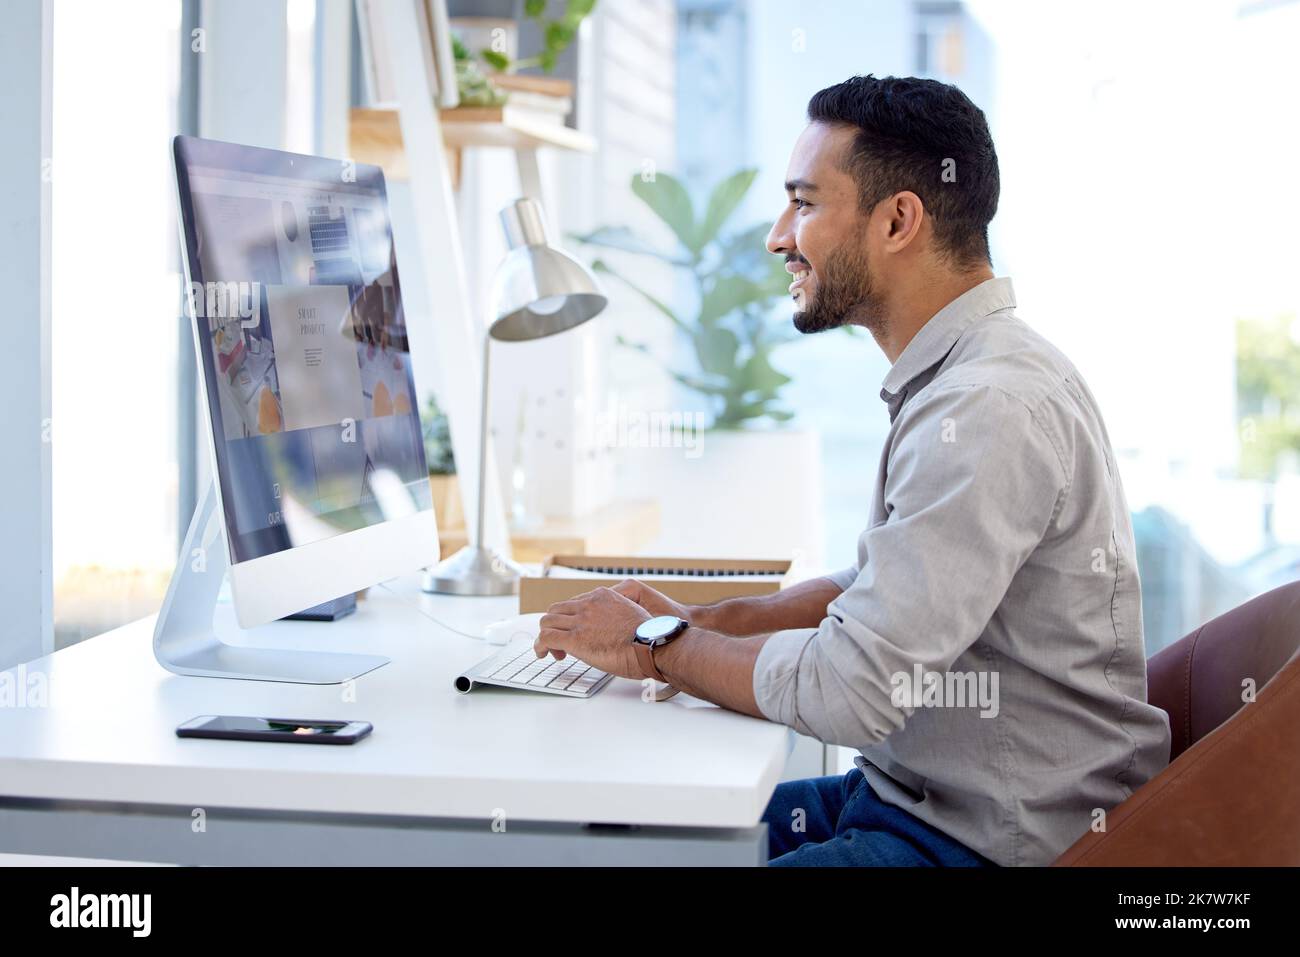 Ambitious and driven to get things done. a young businessman working on a computer in an office. Stock Photo